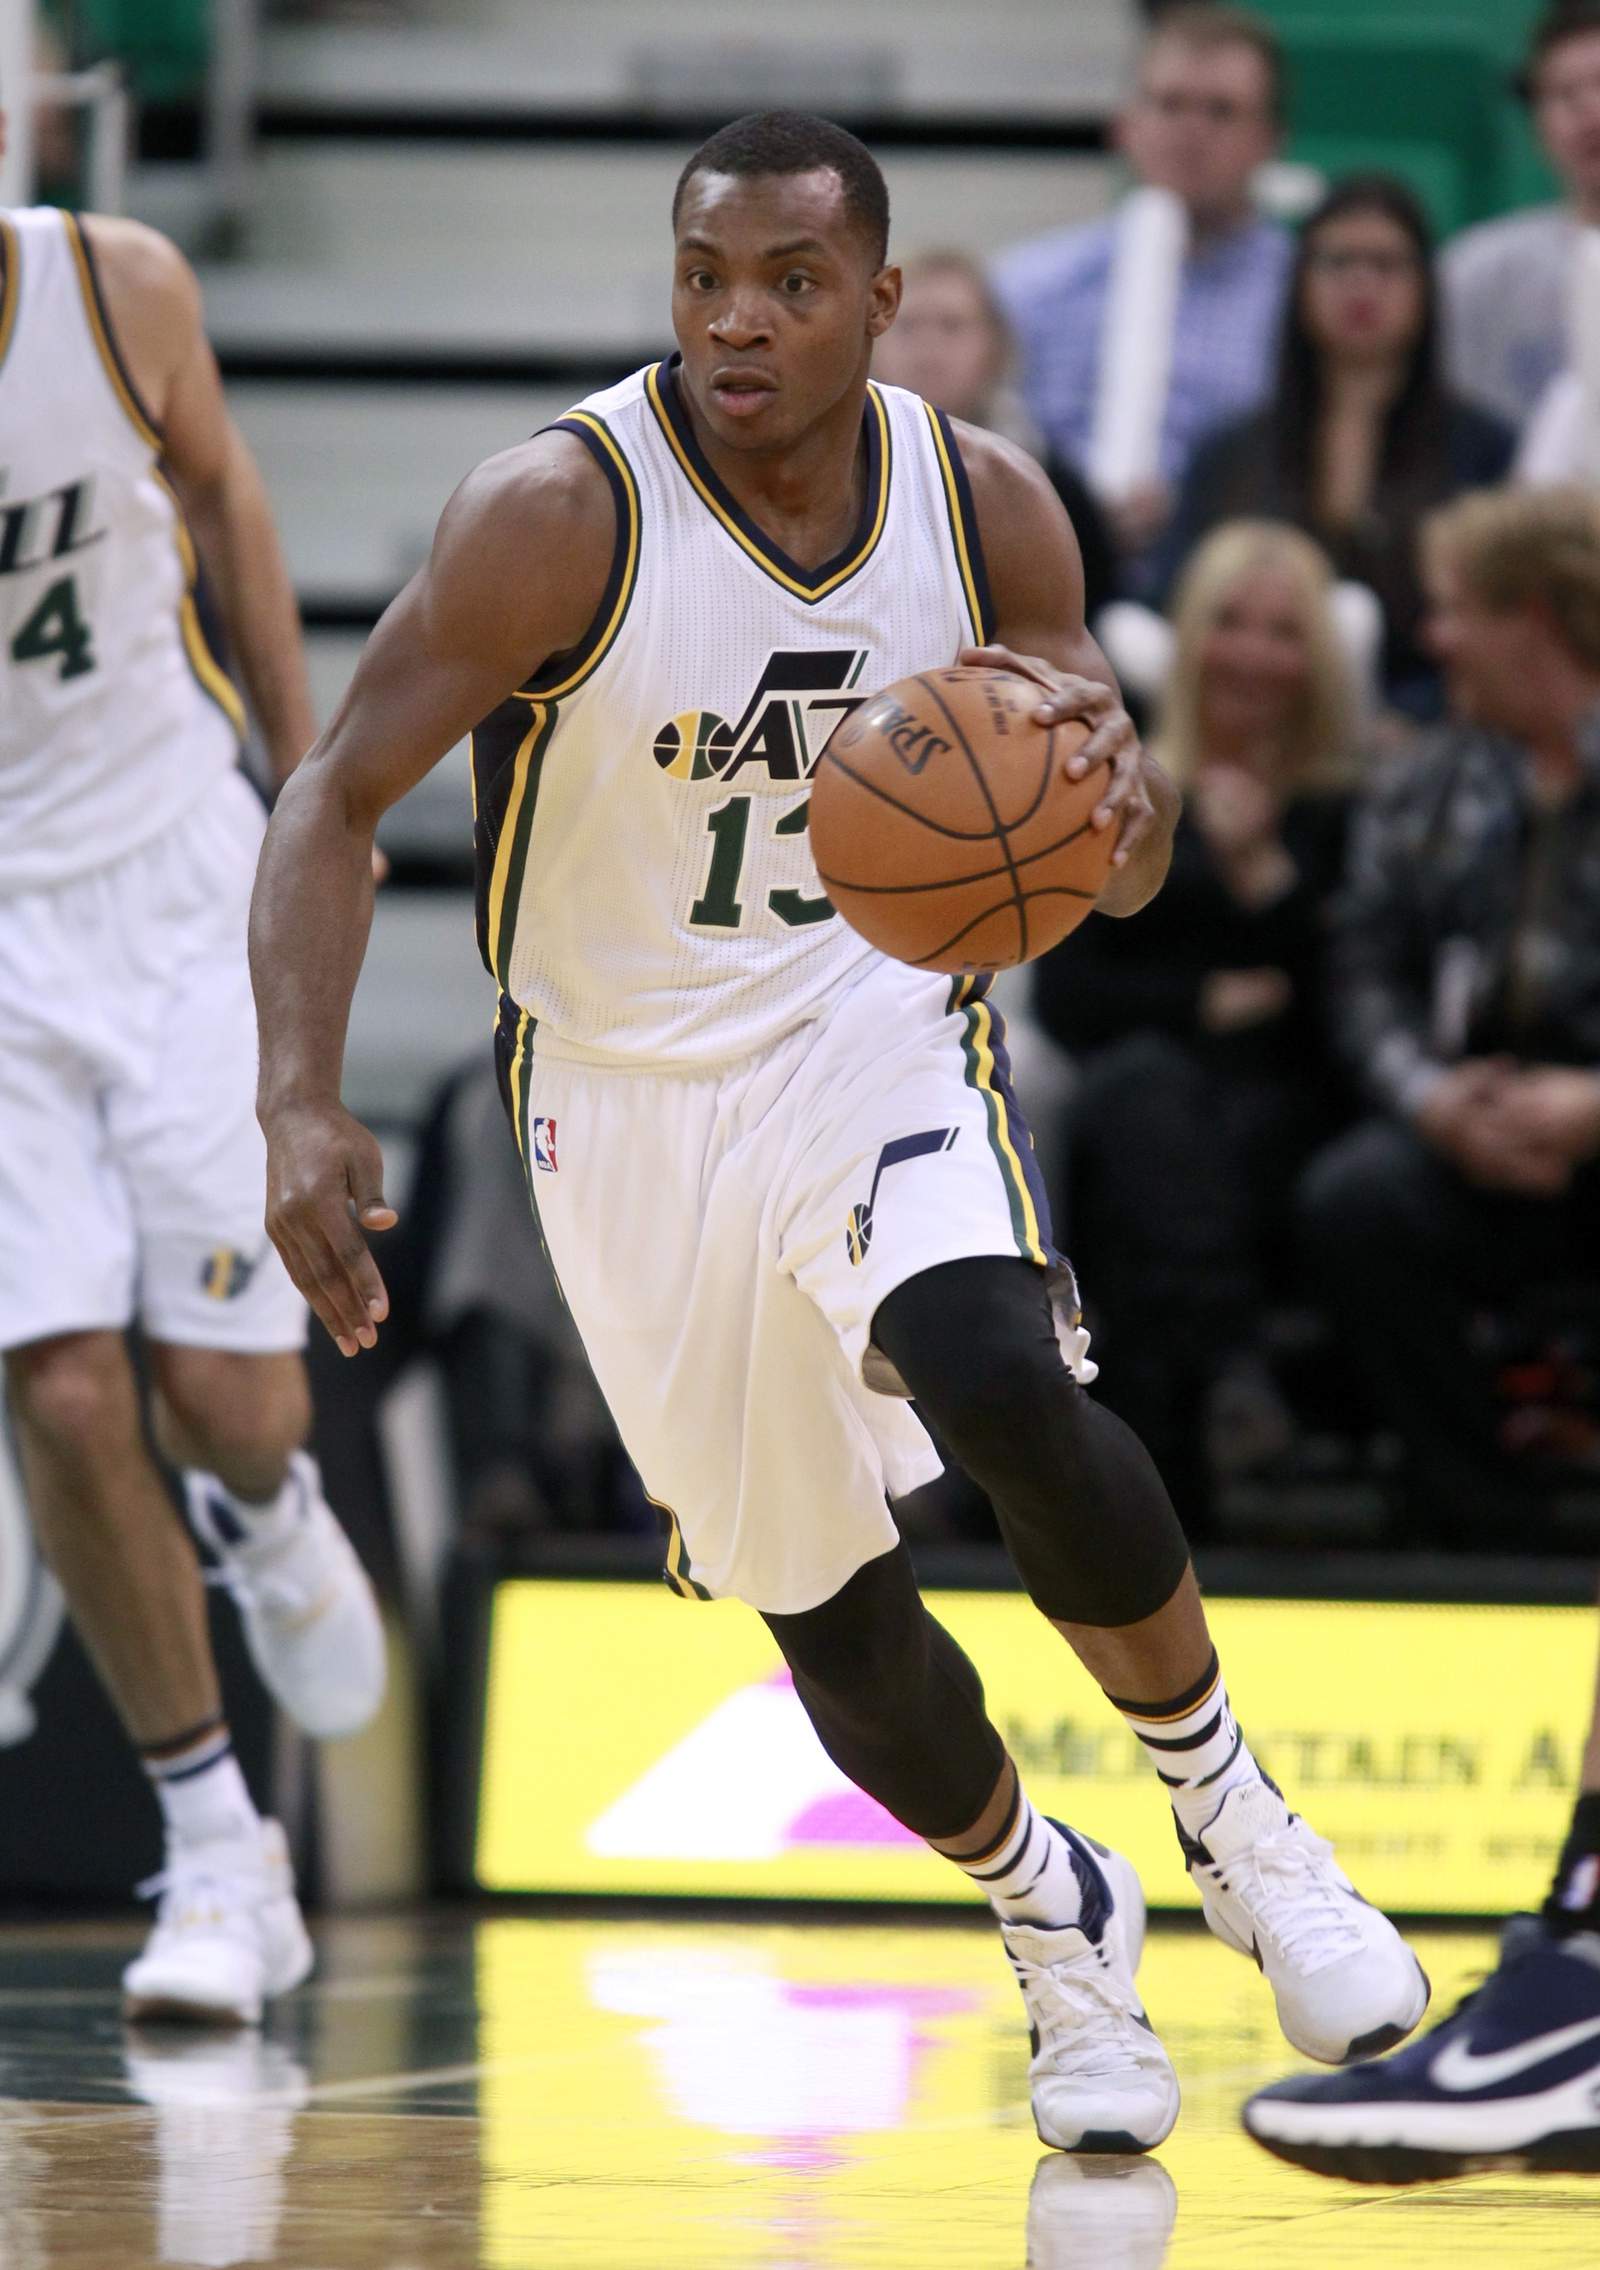 Millsap expresses concerns about probe into Jazz allegation